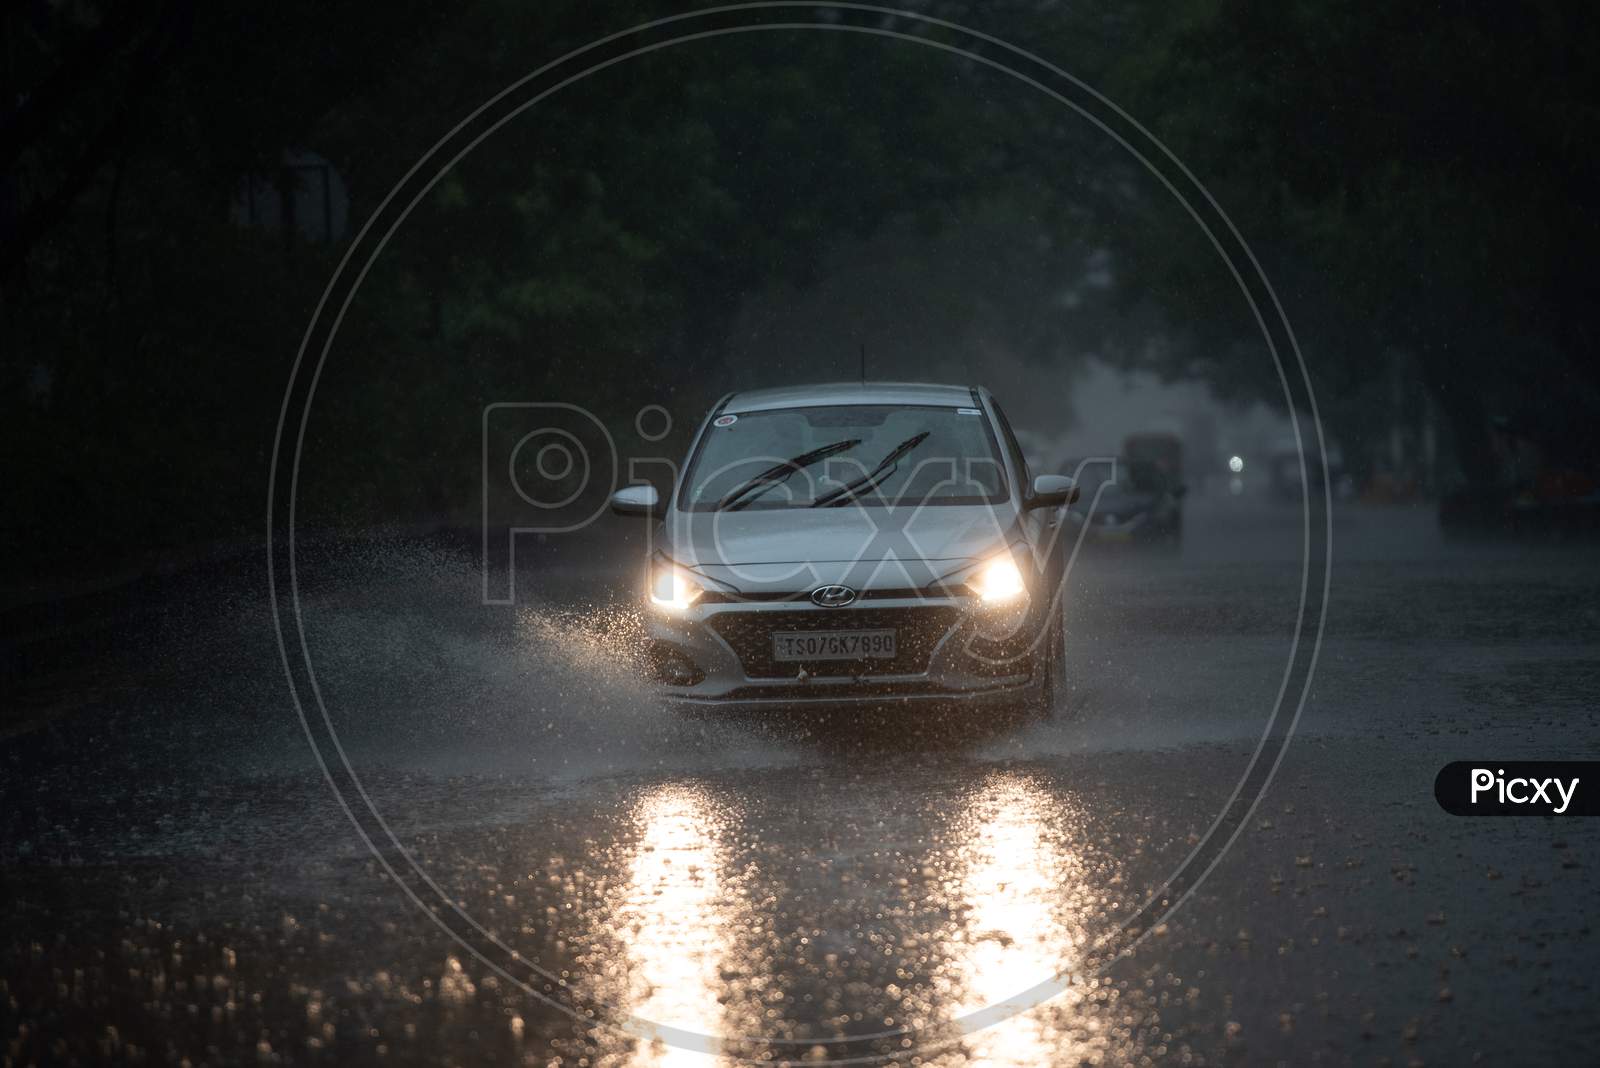 Vehicles ply on KPHB Main road as rain lashes heavily along with gusty winds on May 31, 2020, Hyderabad